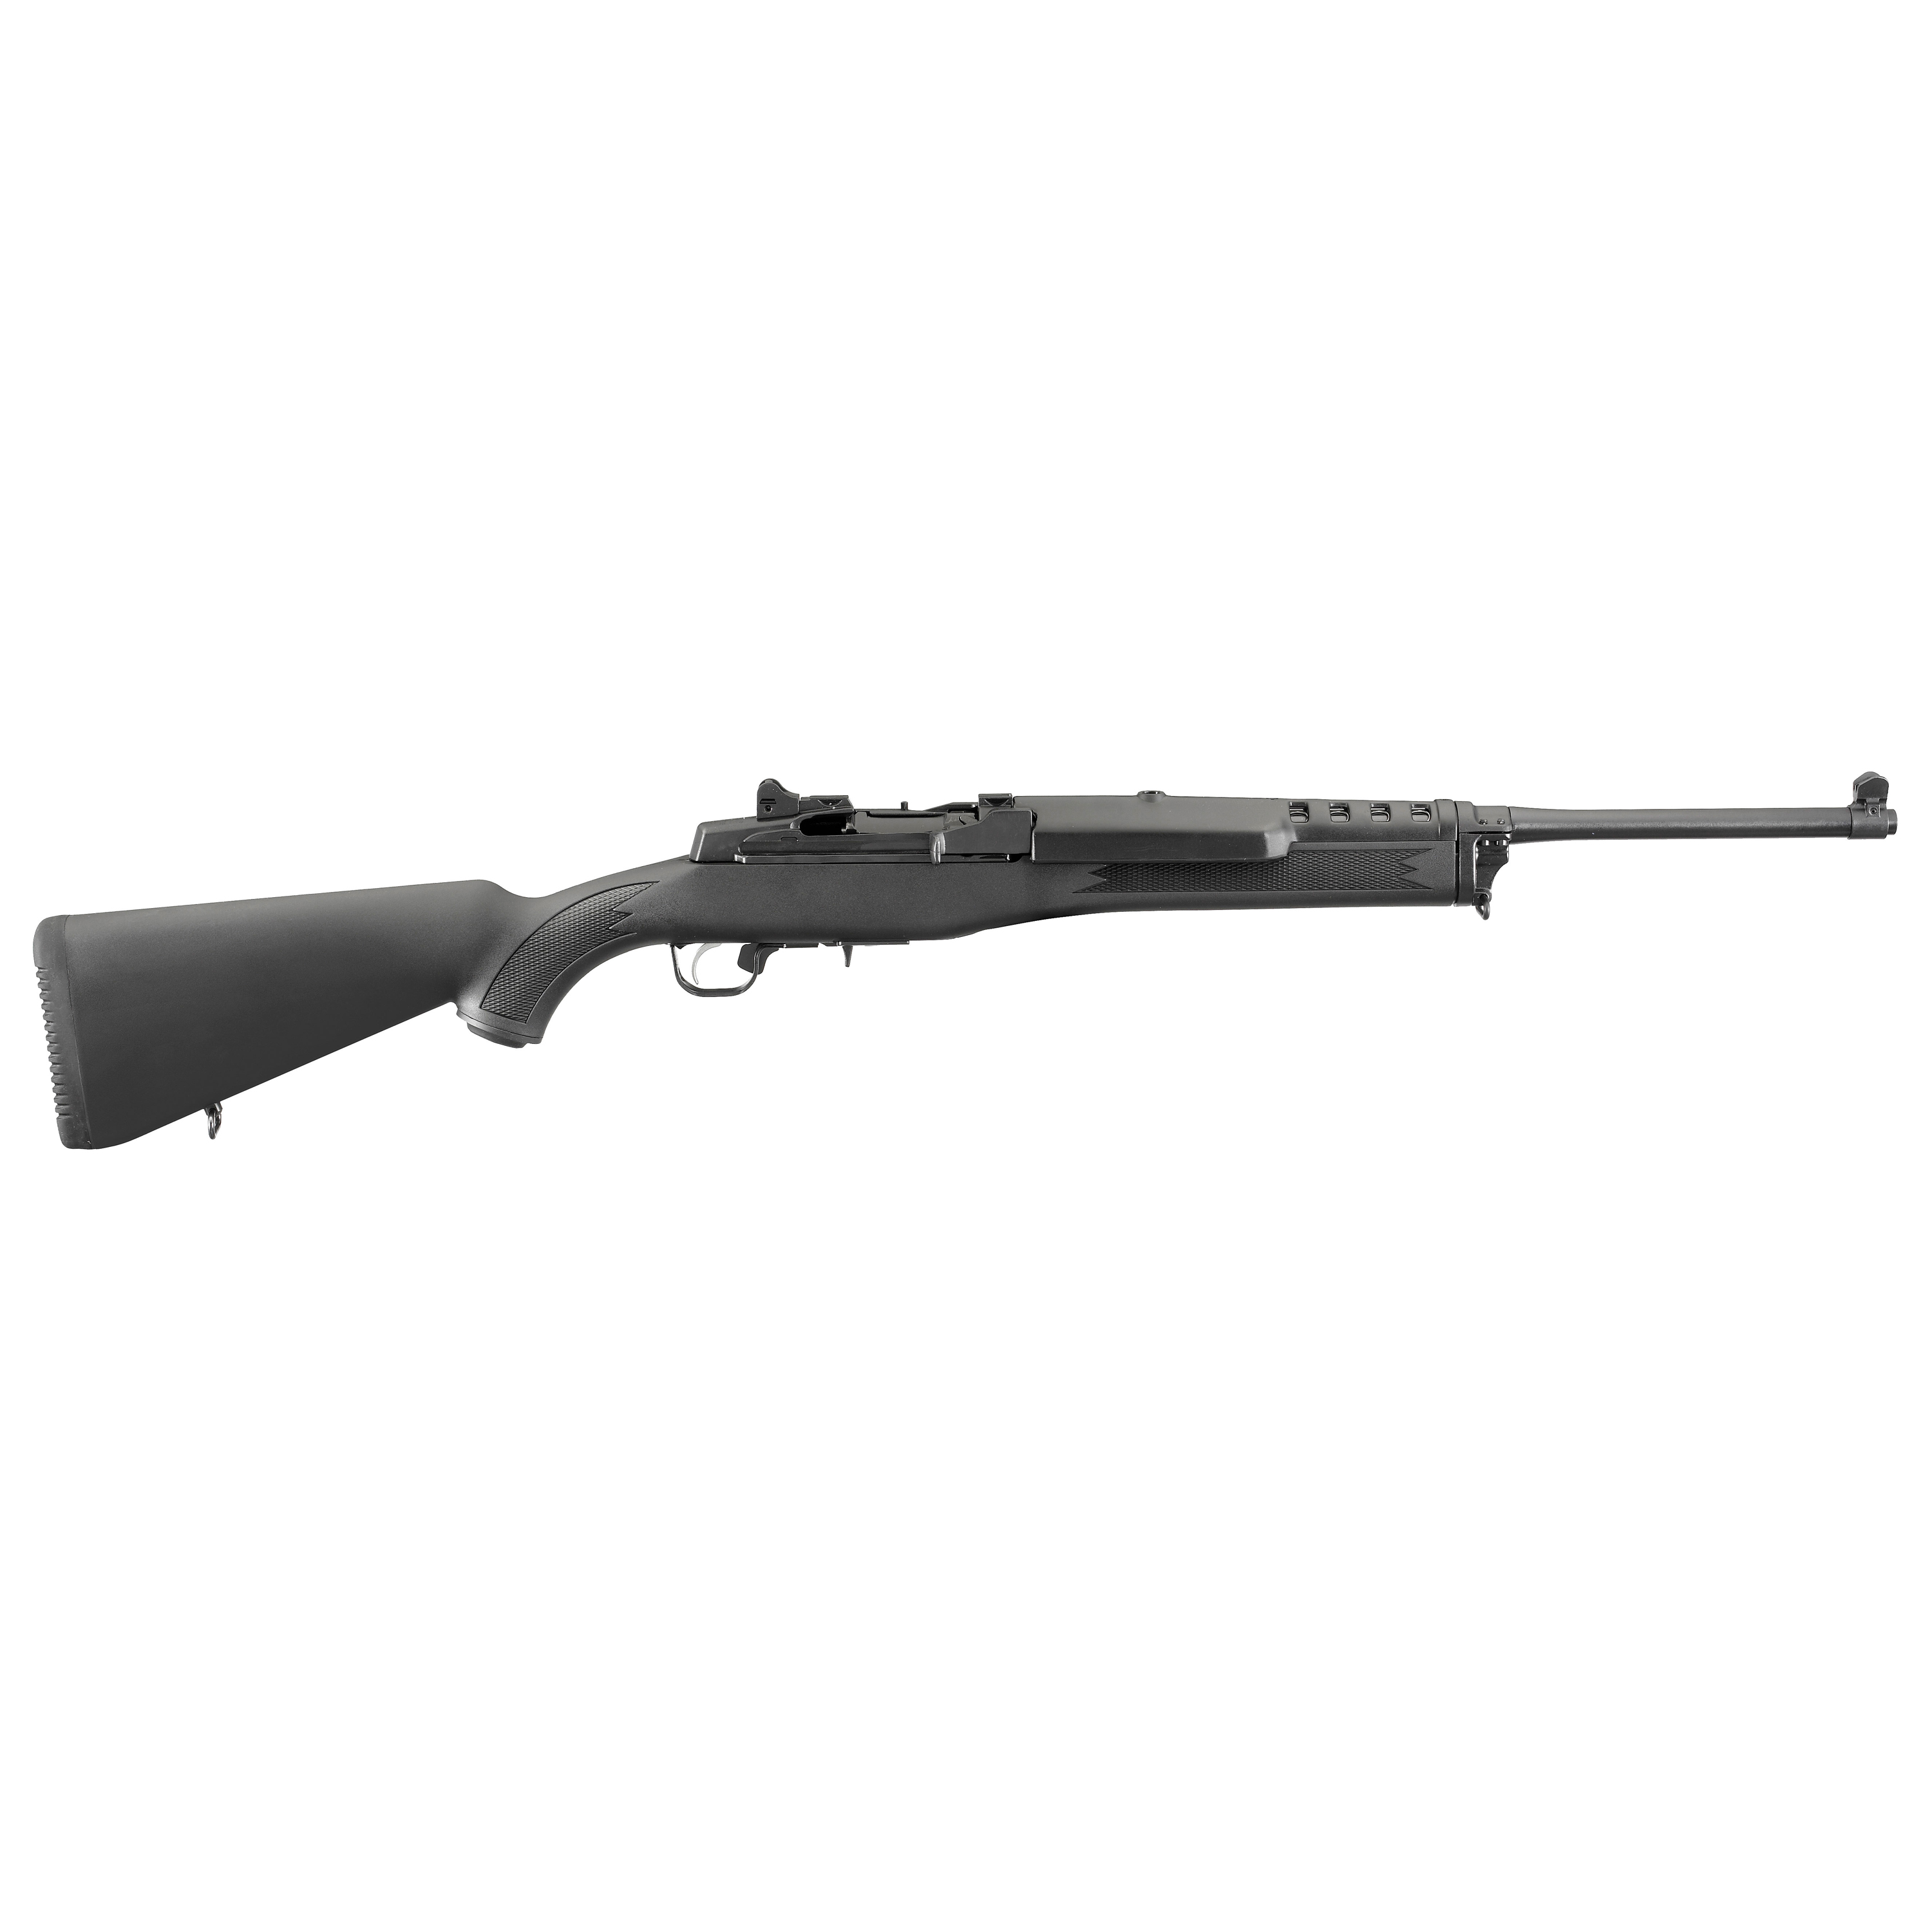 RUGER MINI-14 RNCH 5.56 18.5 5RD SY